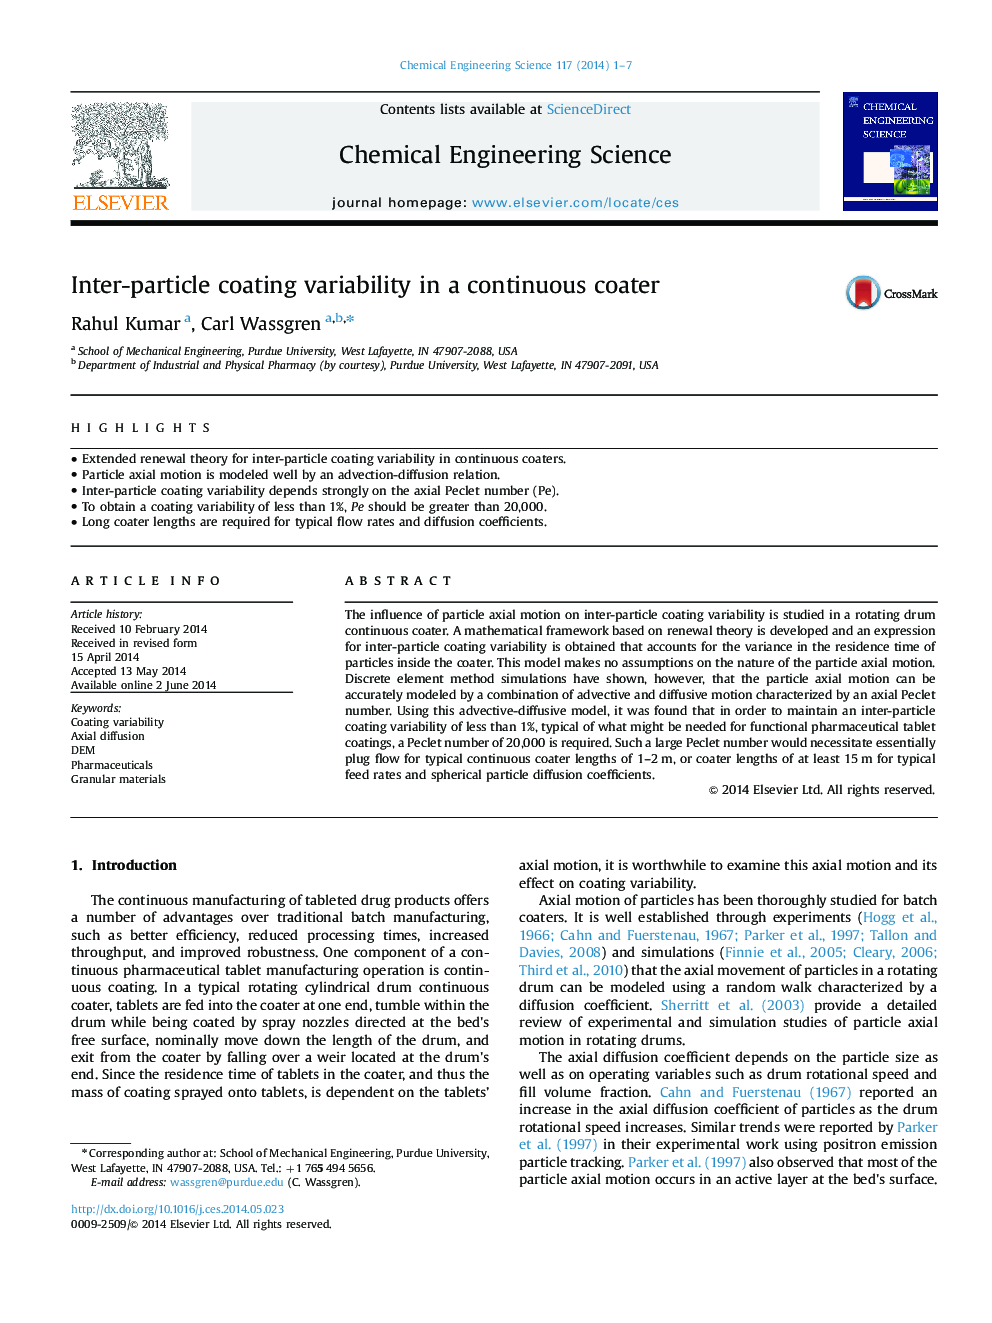 Inter-particle coating variability in a continuous coater